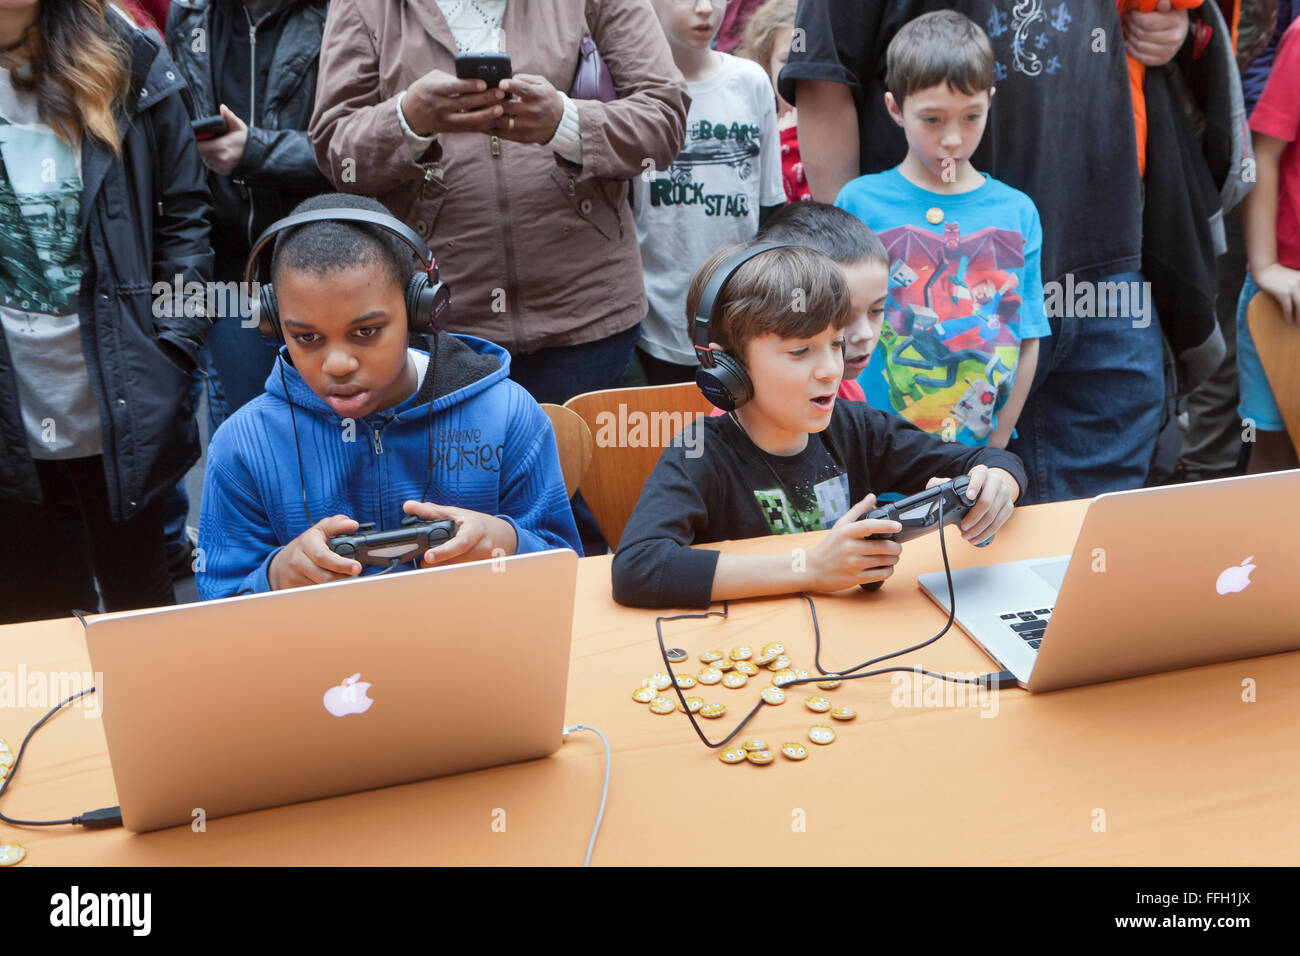 Children playing video games on Apple Powerbook laptop computers - USA Stock Photo